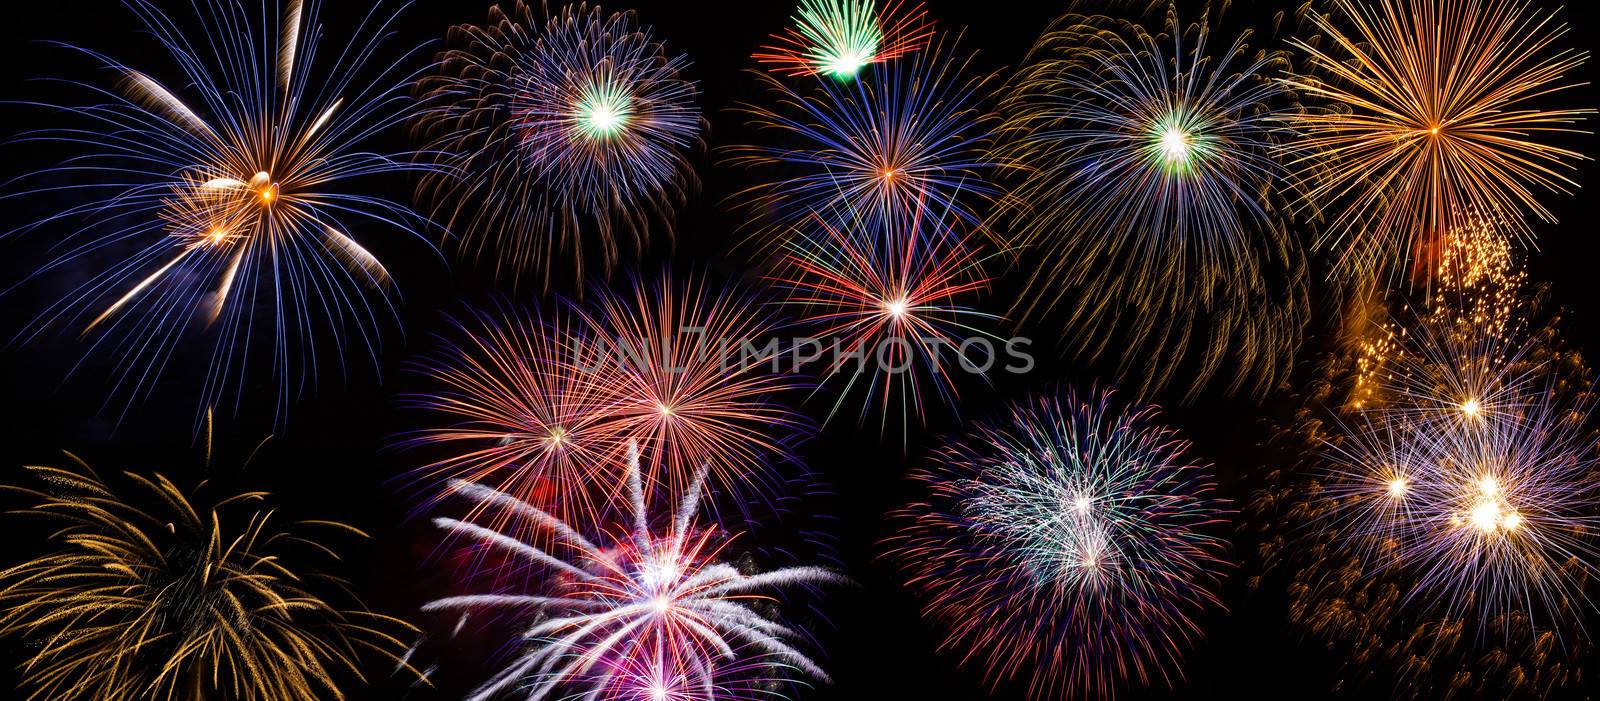 Very large background of fireworks that can be applied to virtually any landscape or city scape. The background is pure black so you can easily overlay it over your favorite landscape. This image is a composite of 9 separate photographs of real fireworks.